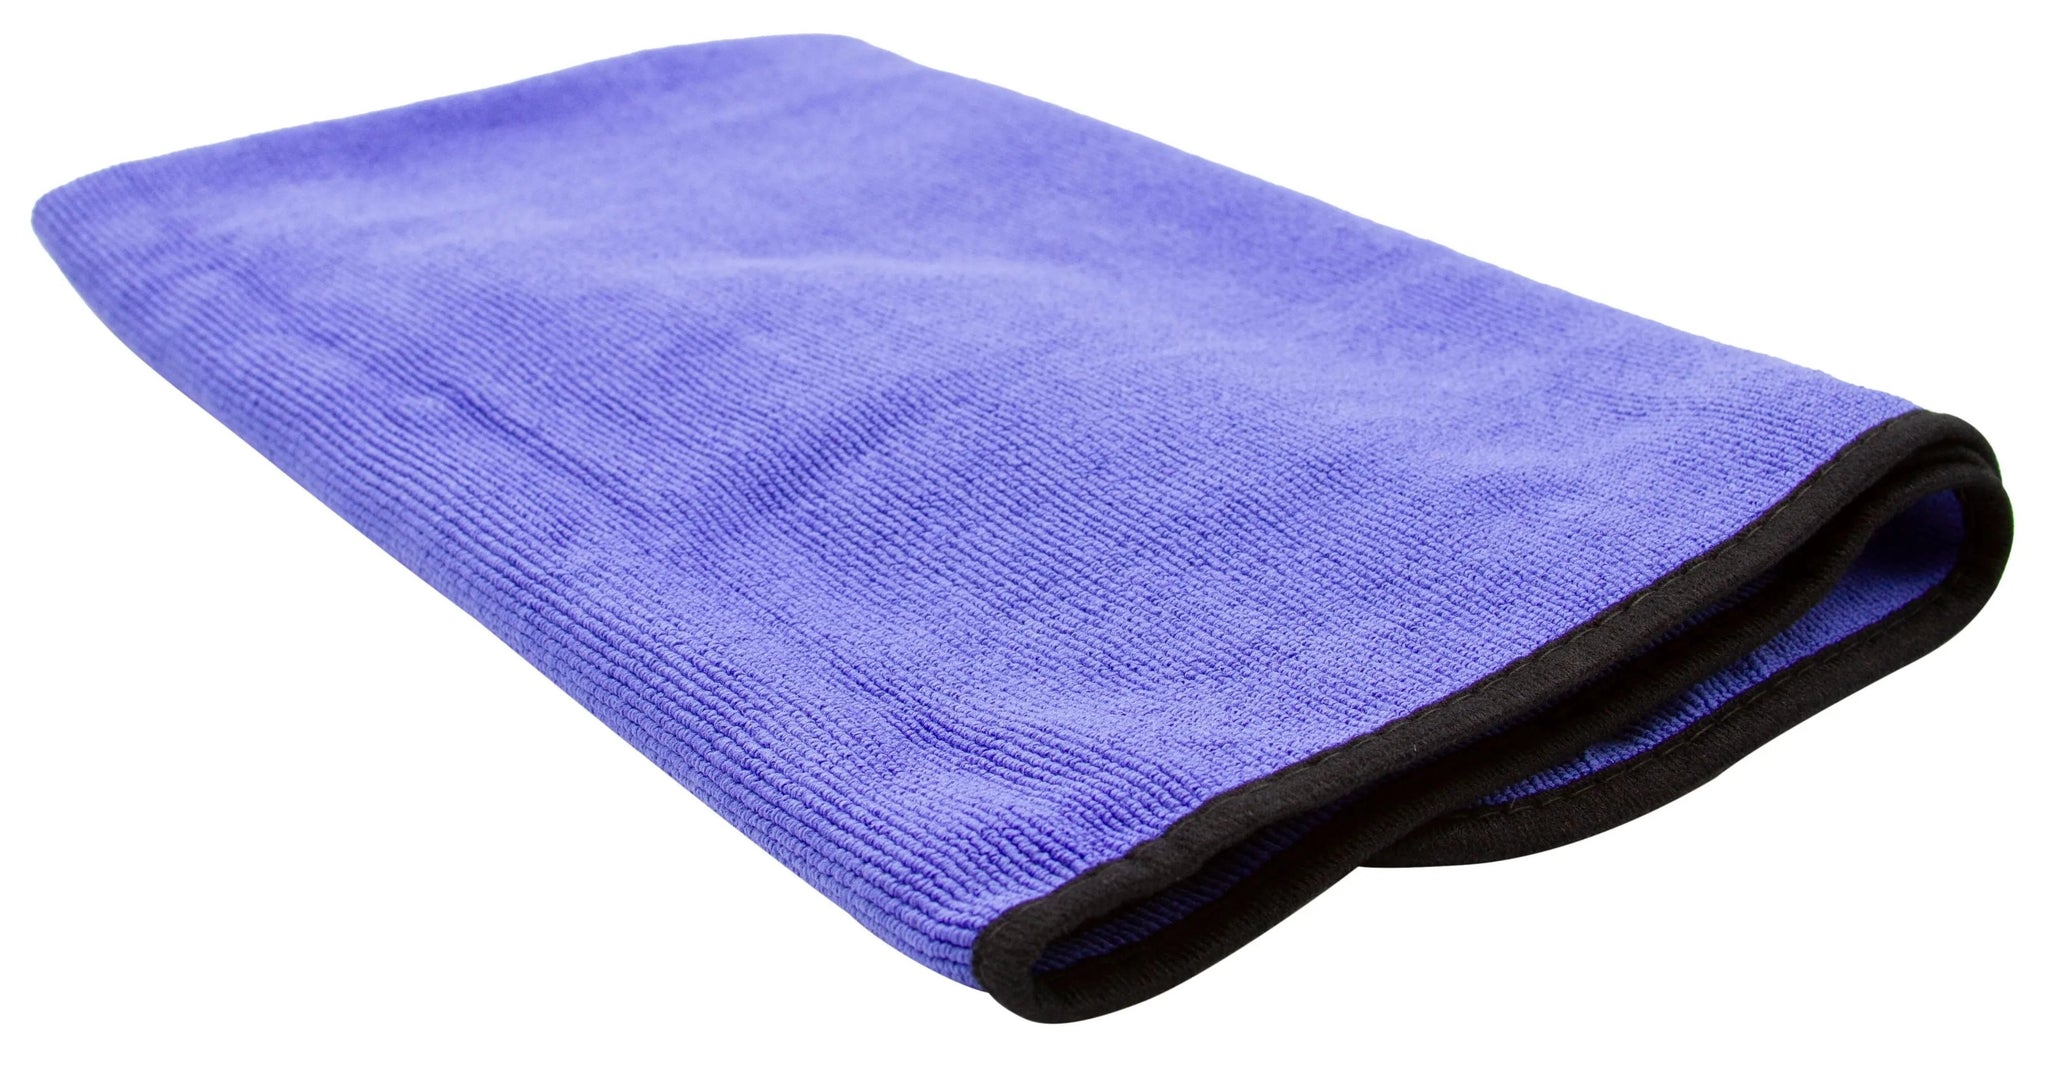 Extra Large Microfiber Drying Towel